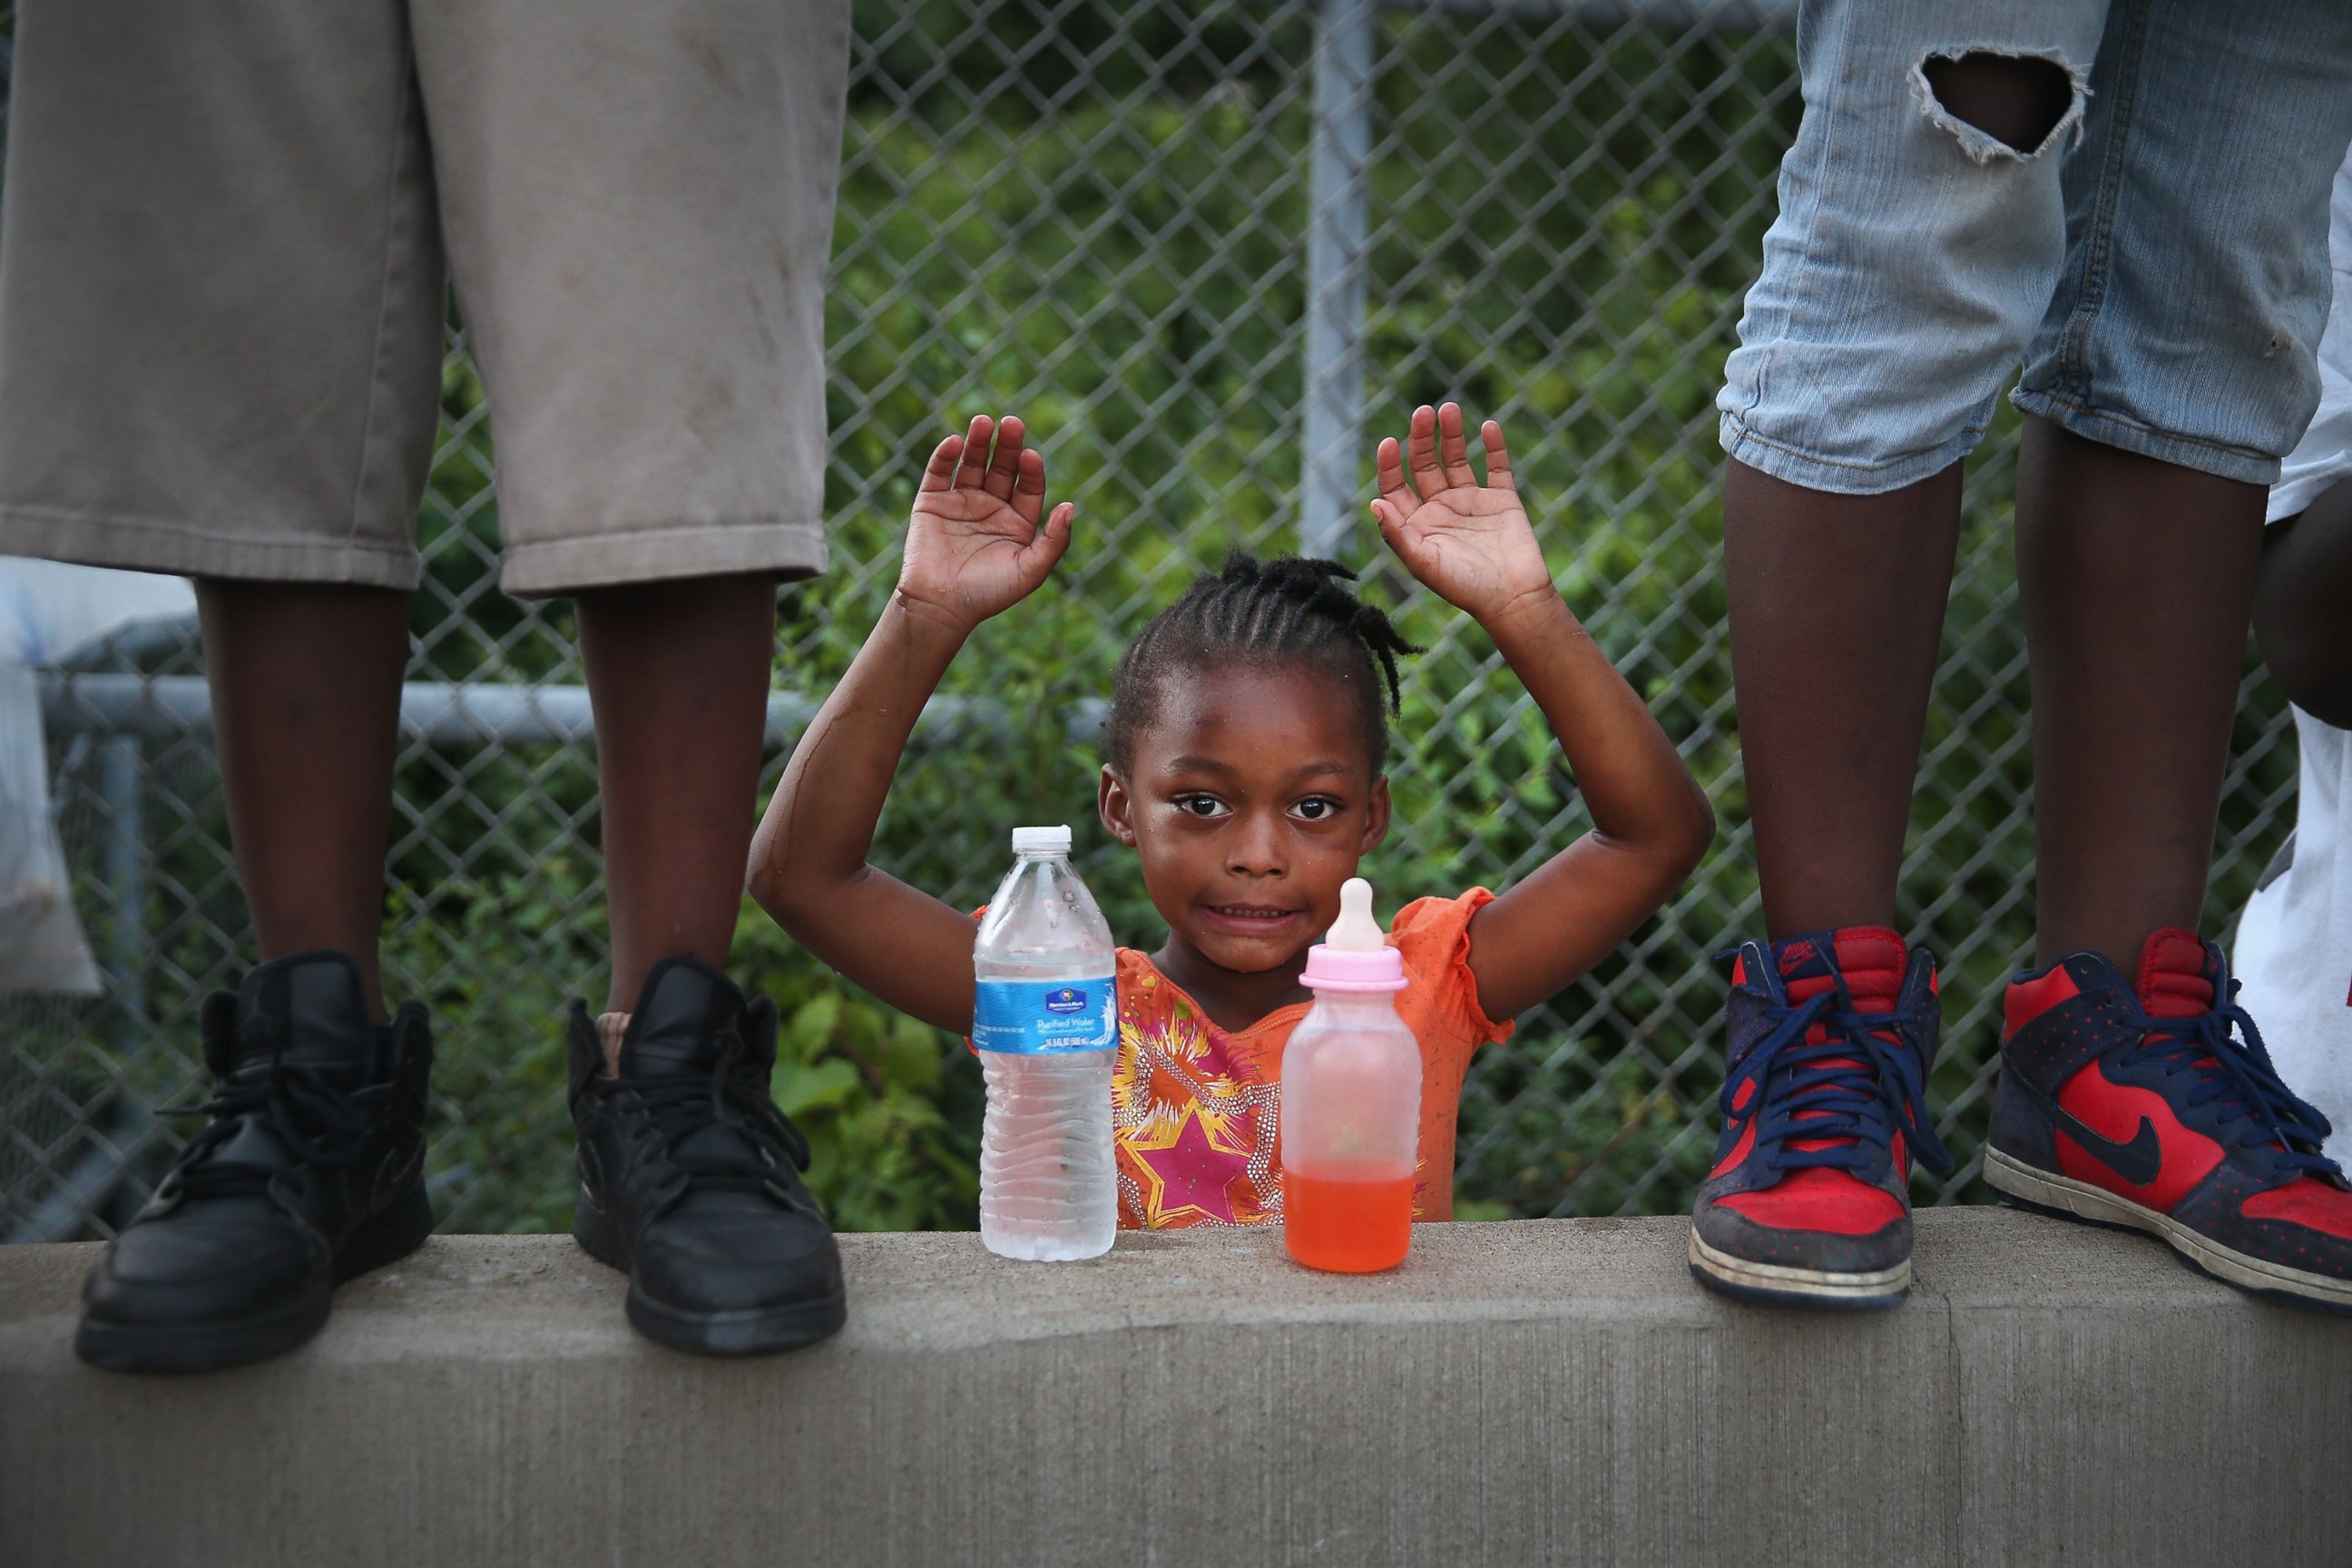 PHOTO: Gabrielle Walker, 5, protests the killing of Michael Brown on Aug. 17, 2014 in Ferguson, Mo.  